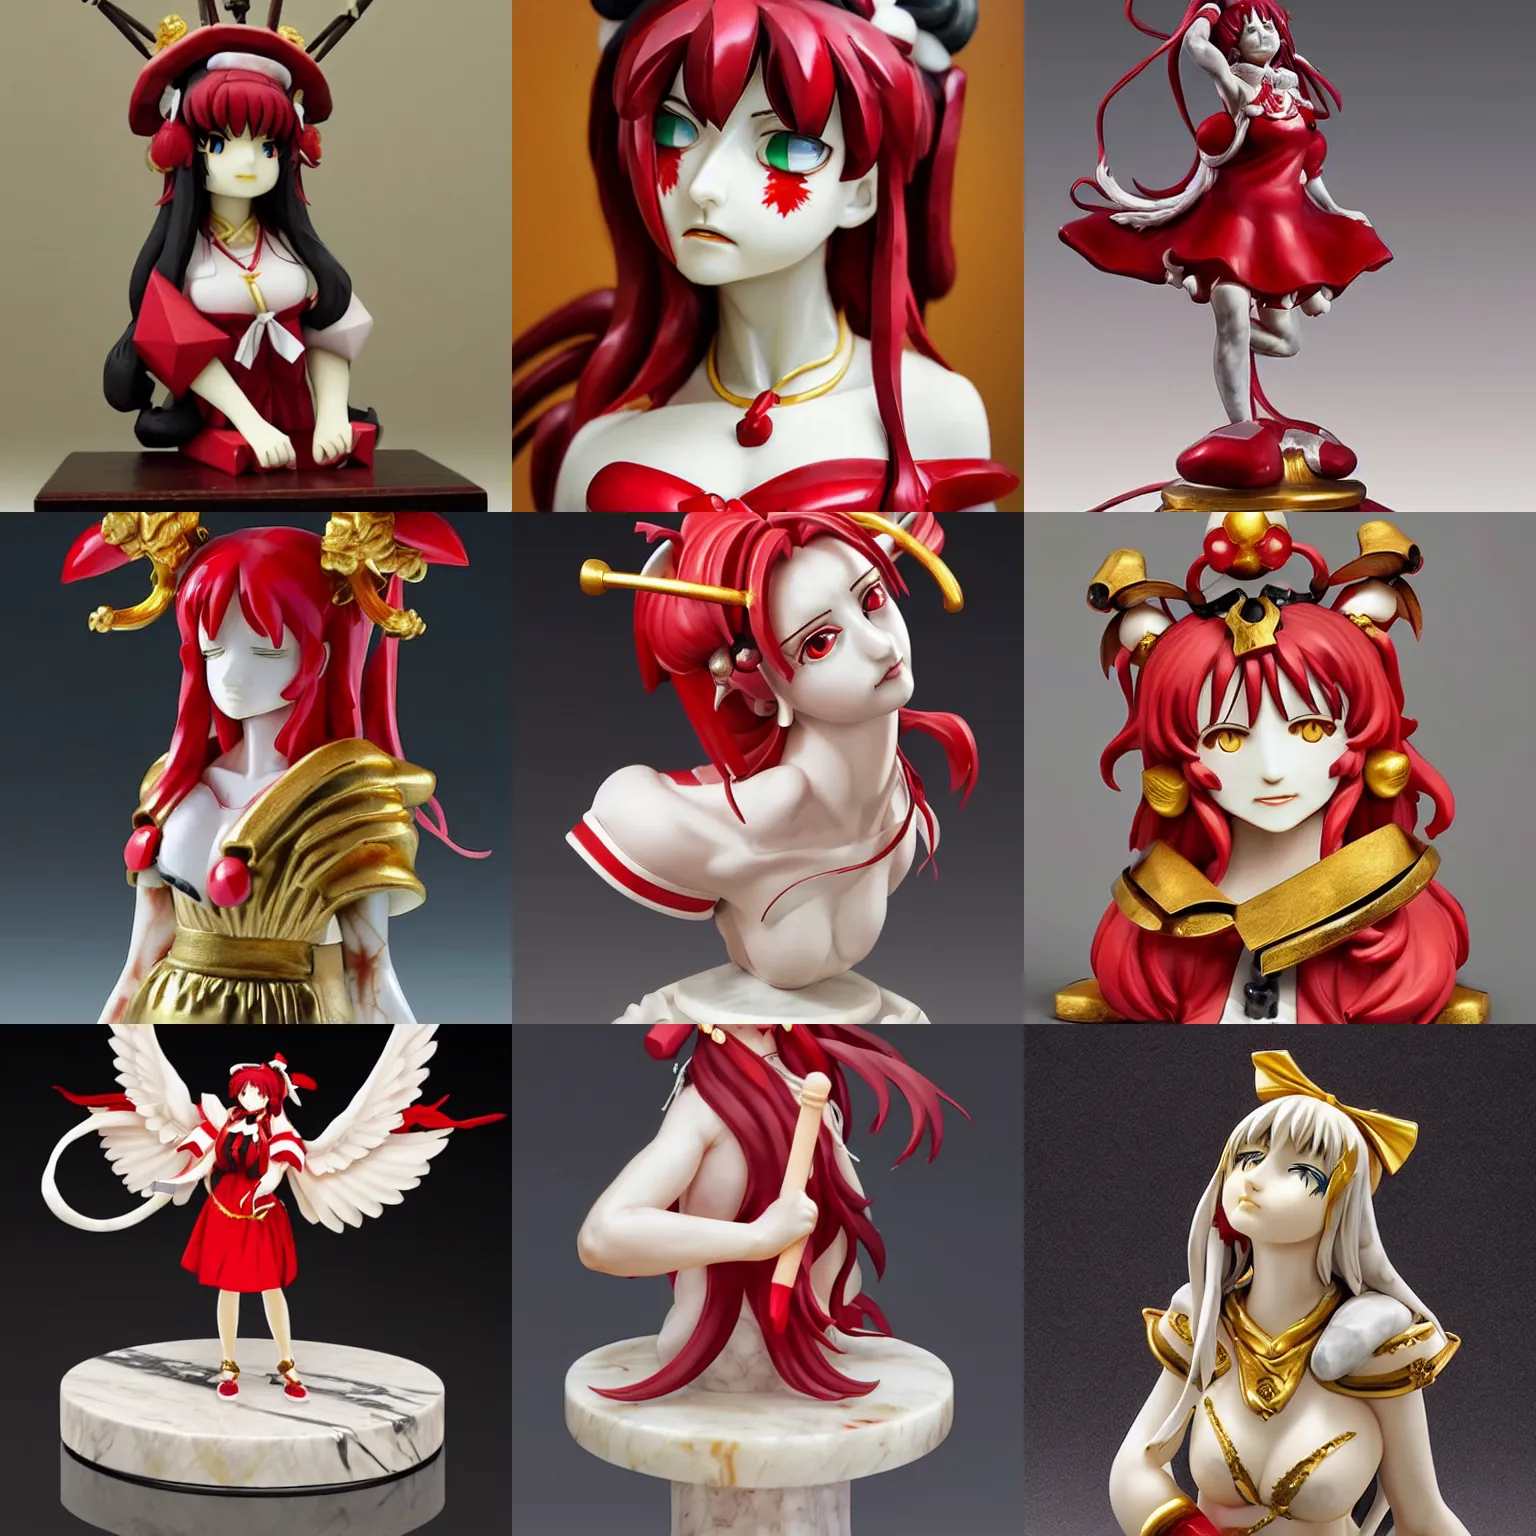 Prompt: a sculpture of reimu hakurei, marble, gold, masterpiece, anatomically correct, photorealistic, ultra realistic, hyperrealistic, extreme details